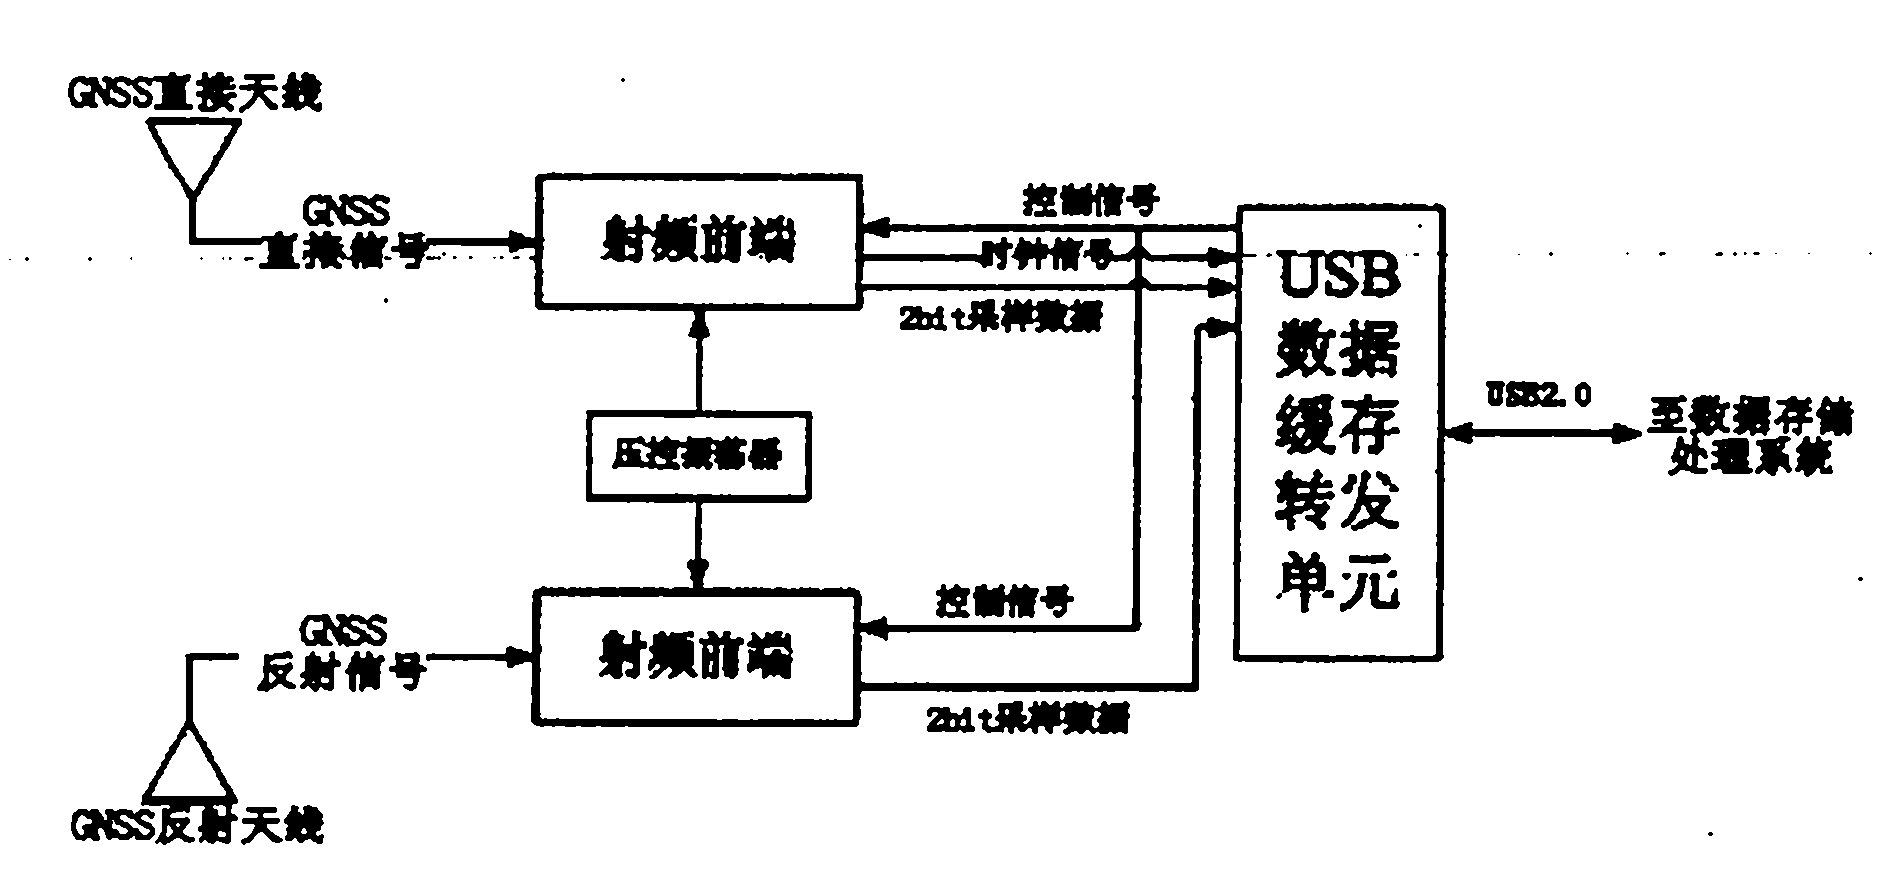 Carrier phase height measurement device based on GNSS-R technology and method thereof